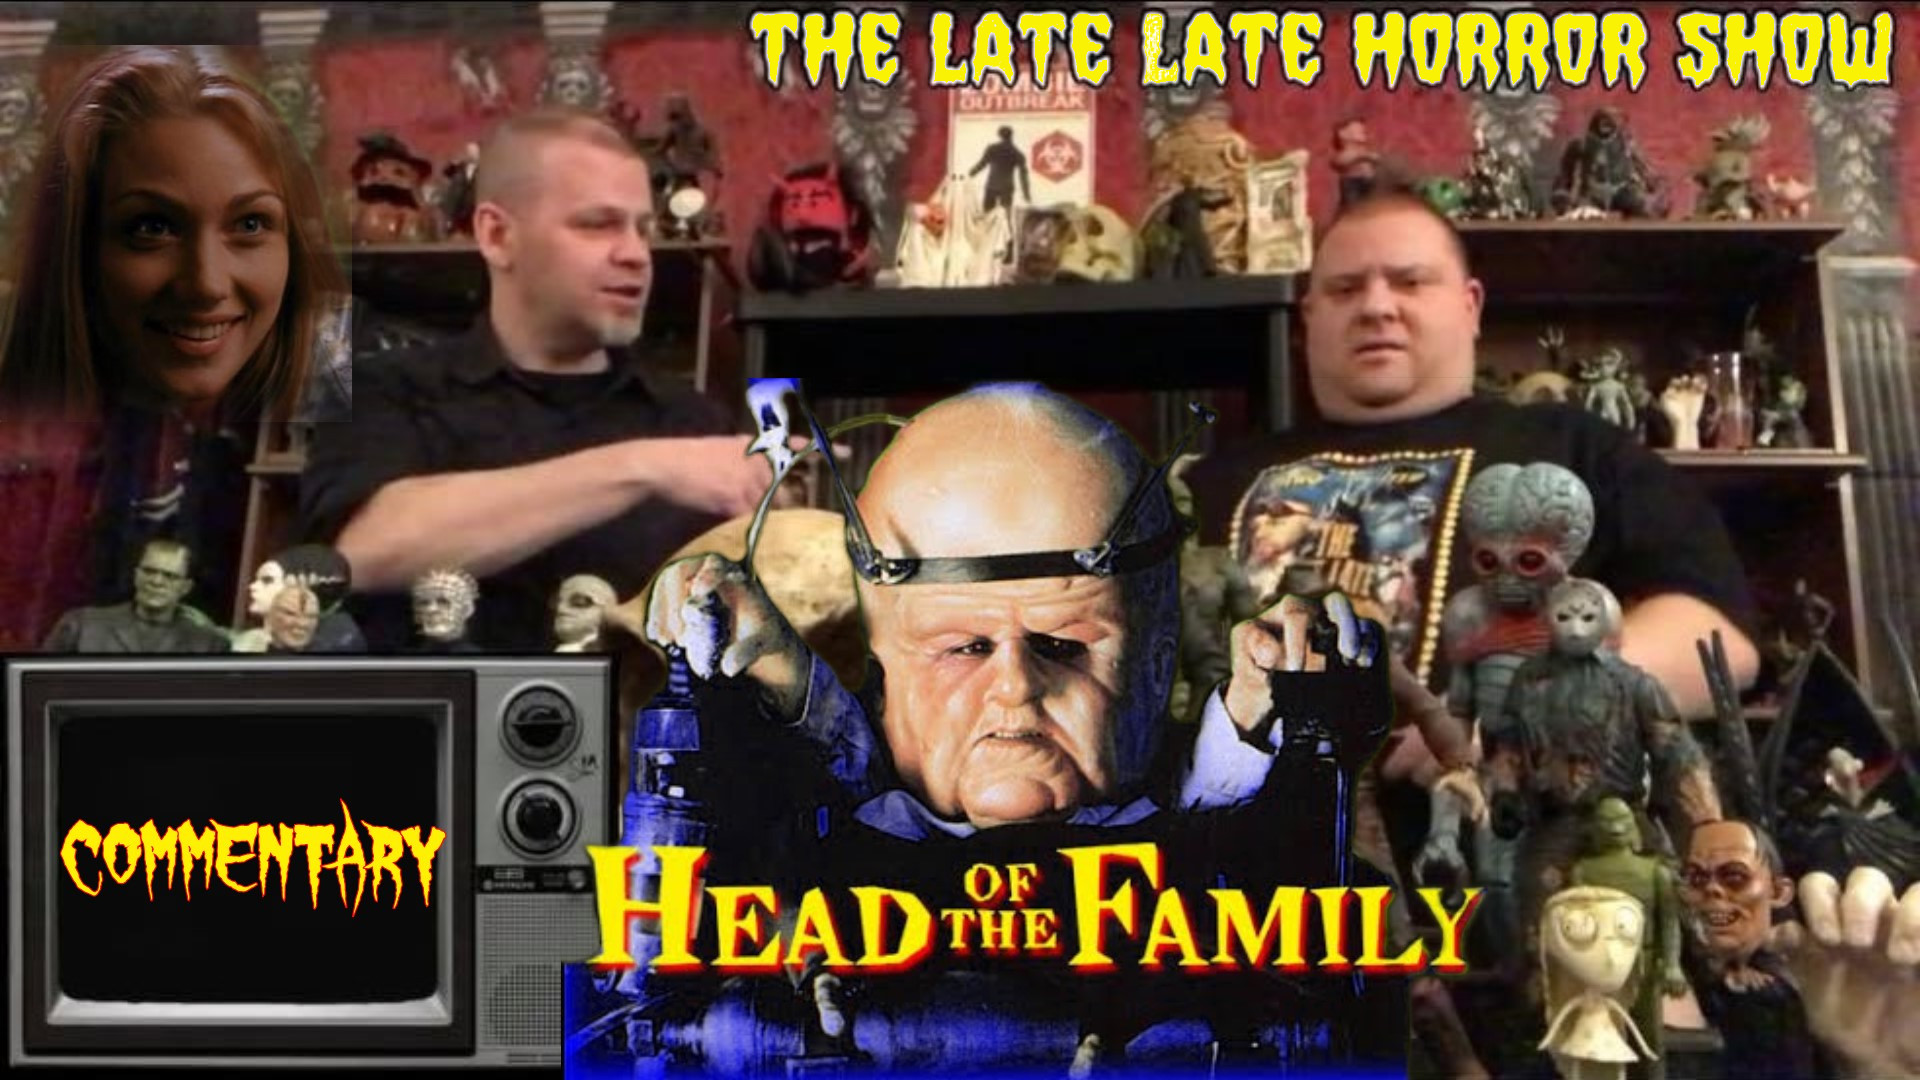 THE LATE LATE HORROR SHOW: HEAD OF THE FAMILY 1996 COMMENTARY